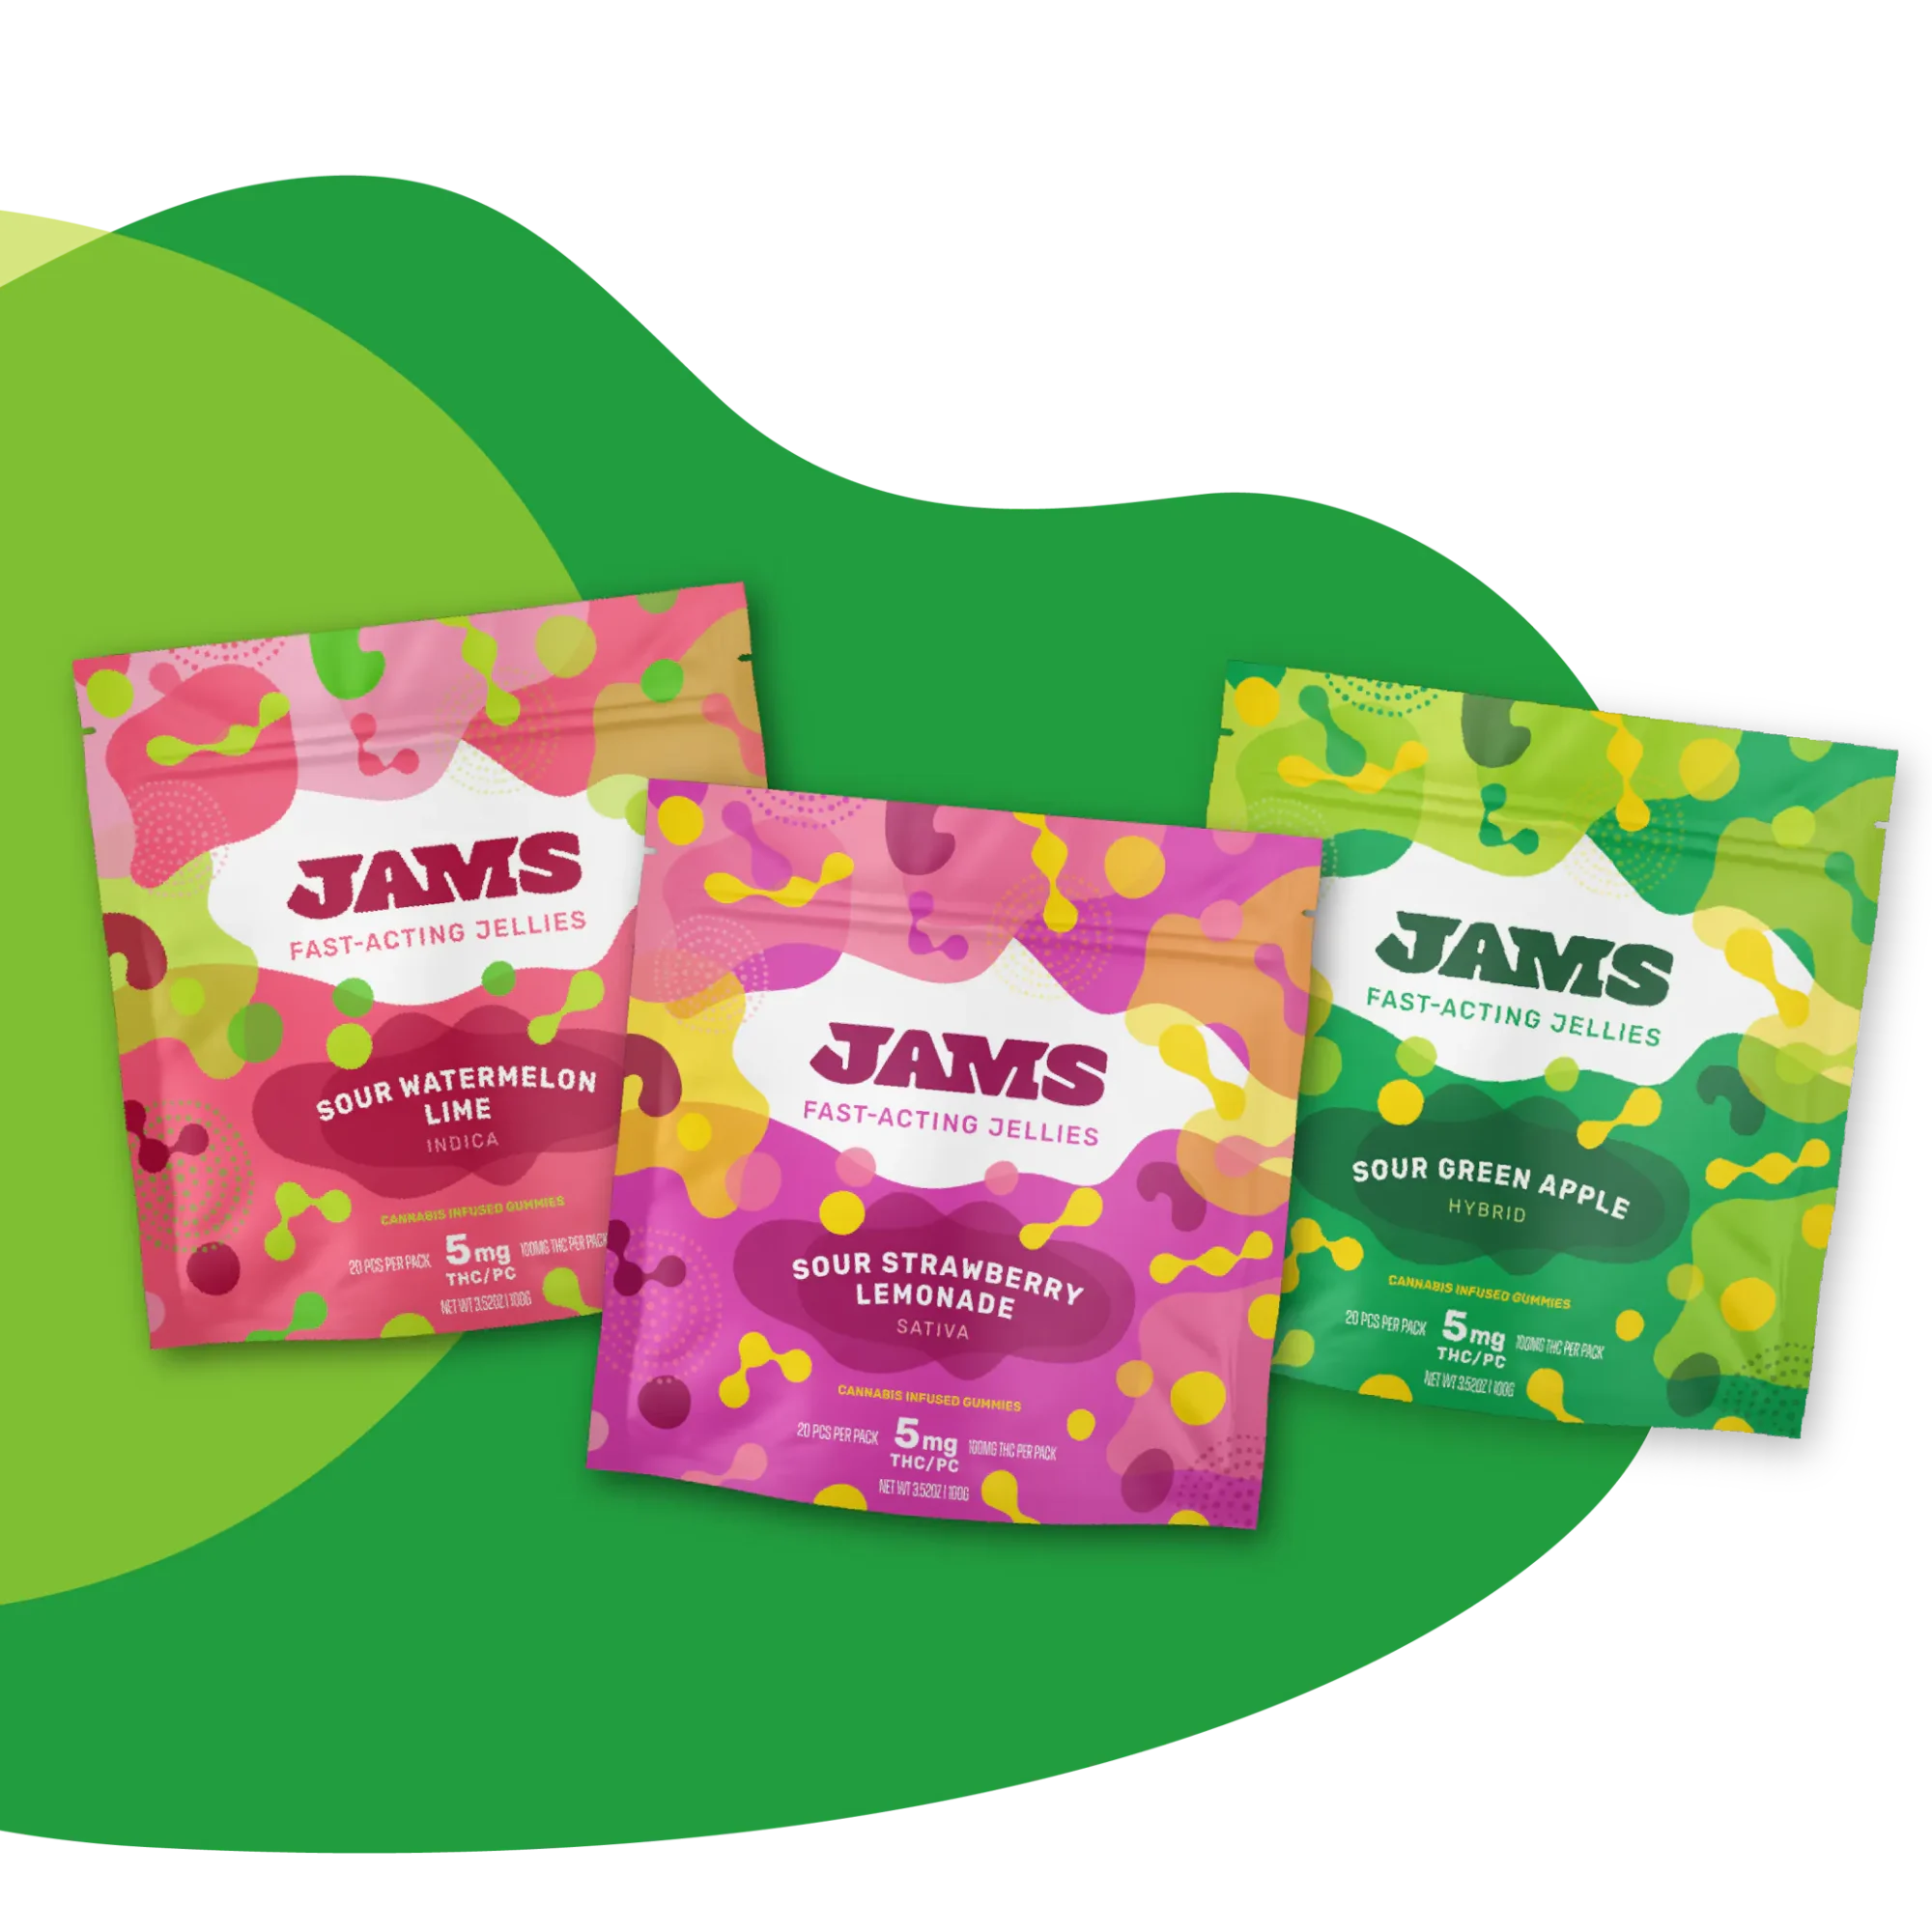 JAMS Fast-Acting Jellies products